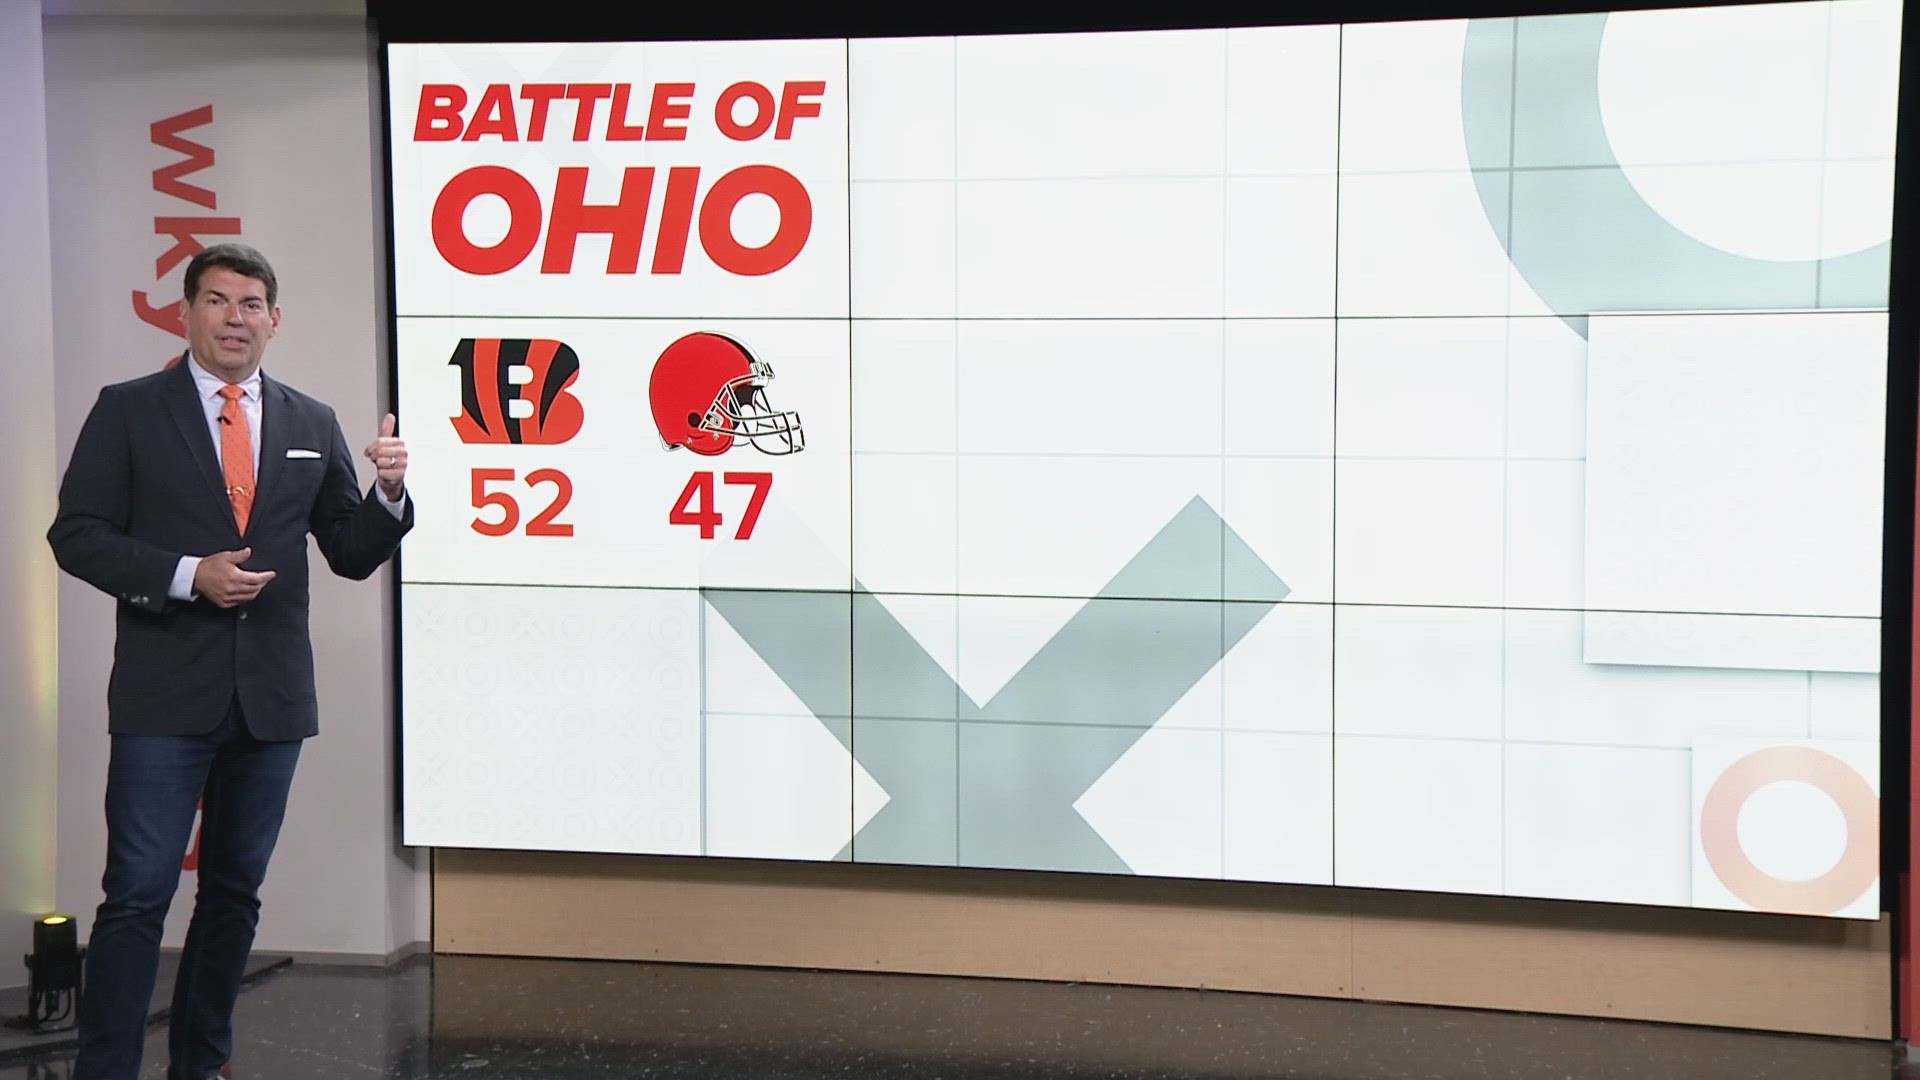 Let the Battle of Ohio begin! The Cleveland Browns are ready to face the Cincinnati Bengals as the 2023 football season kicks off.